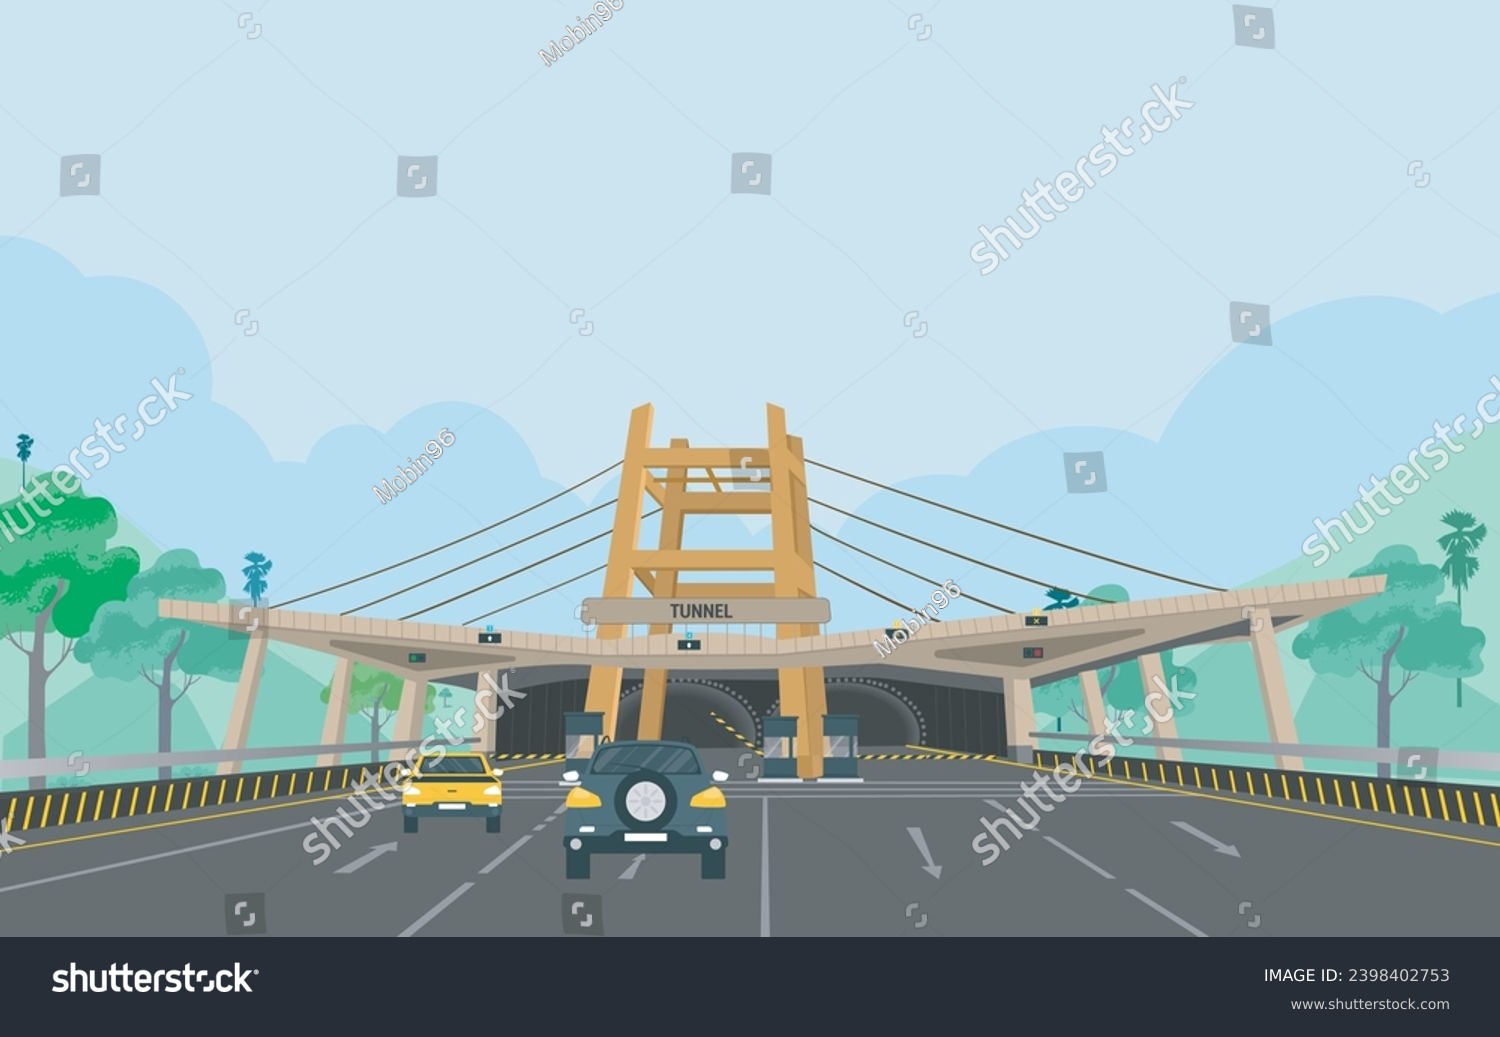 SVG of Bangabandhu Sheikh Mujib Tunnel in Bangladesh illustration, Road tunnel concept. Horizontal mountain landscape with entrance to the tunnel. Vector illustration in flat style svg